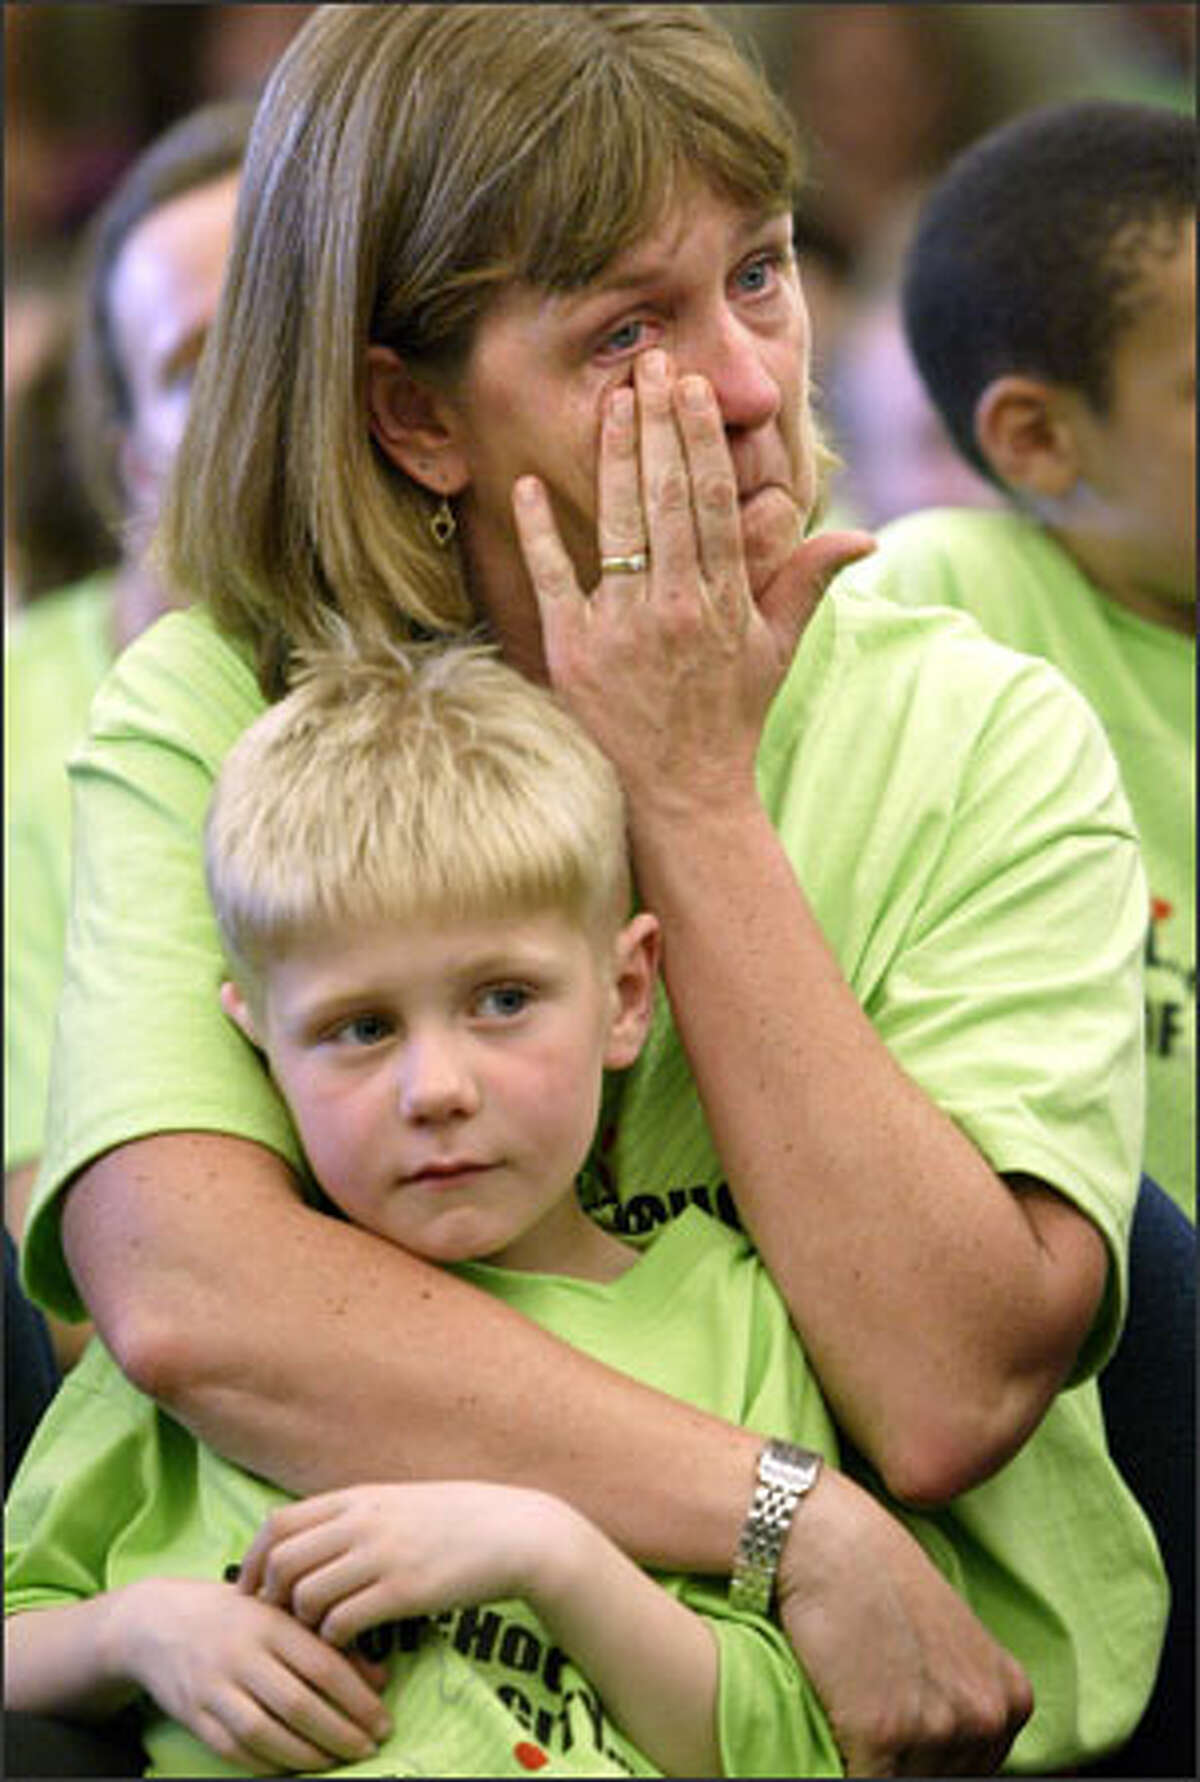 Lynne Butz tears up while holding onto her son, Simon, 7, at a Seattle School Board meeting. More than 200 parents and students turned out to protest the district's plan to close 10 schools.